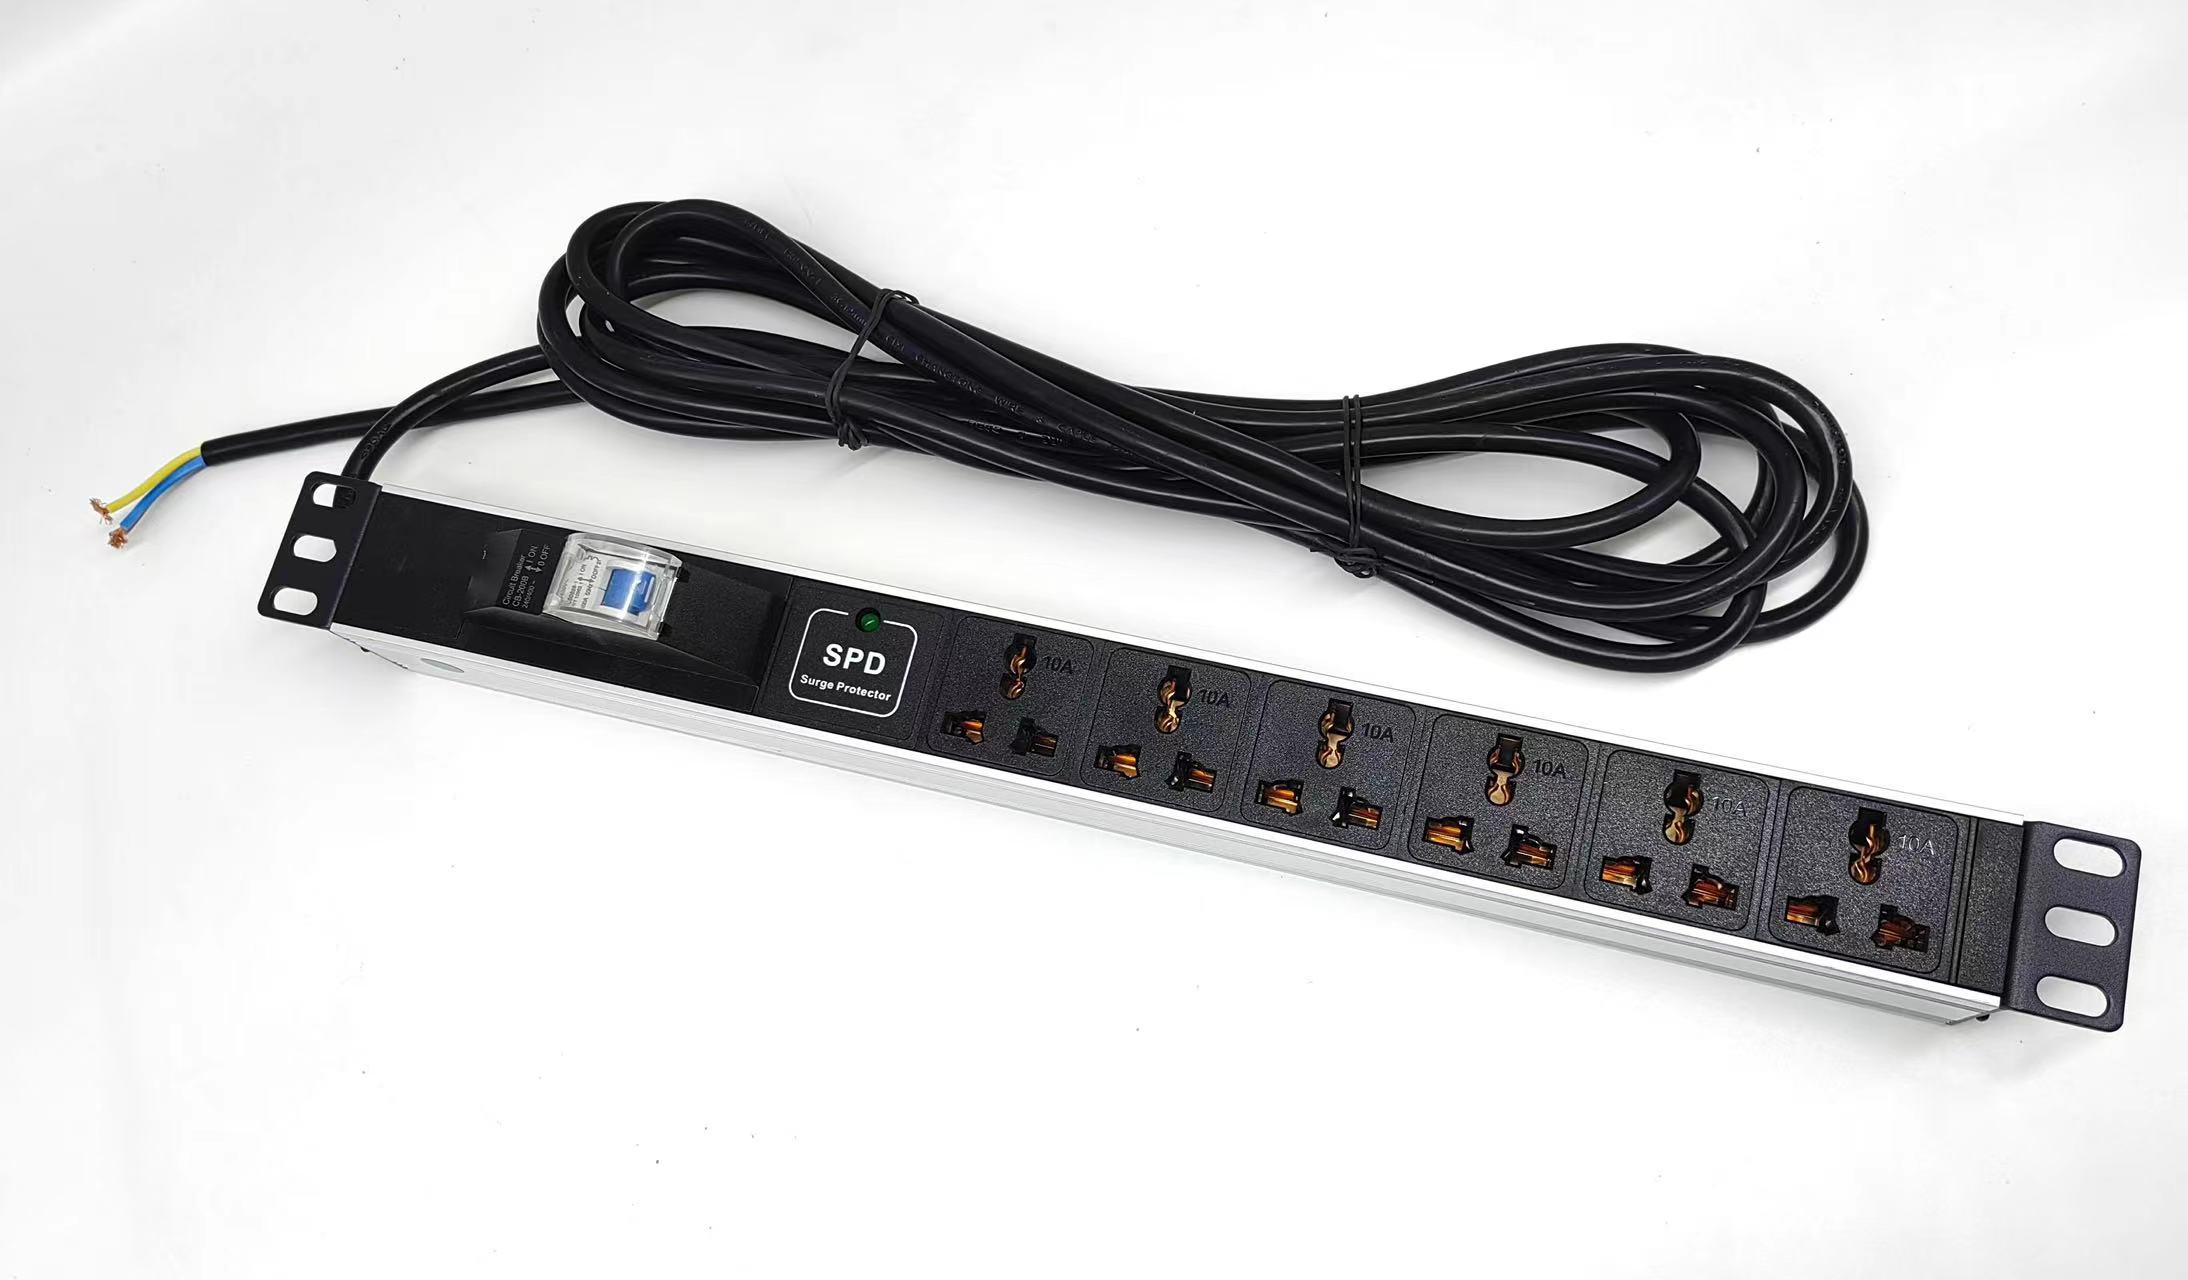 19″ 1U PDU 6 universal sockets with MCB and Surge protector